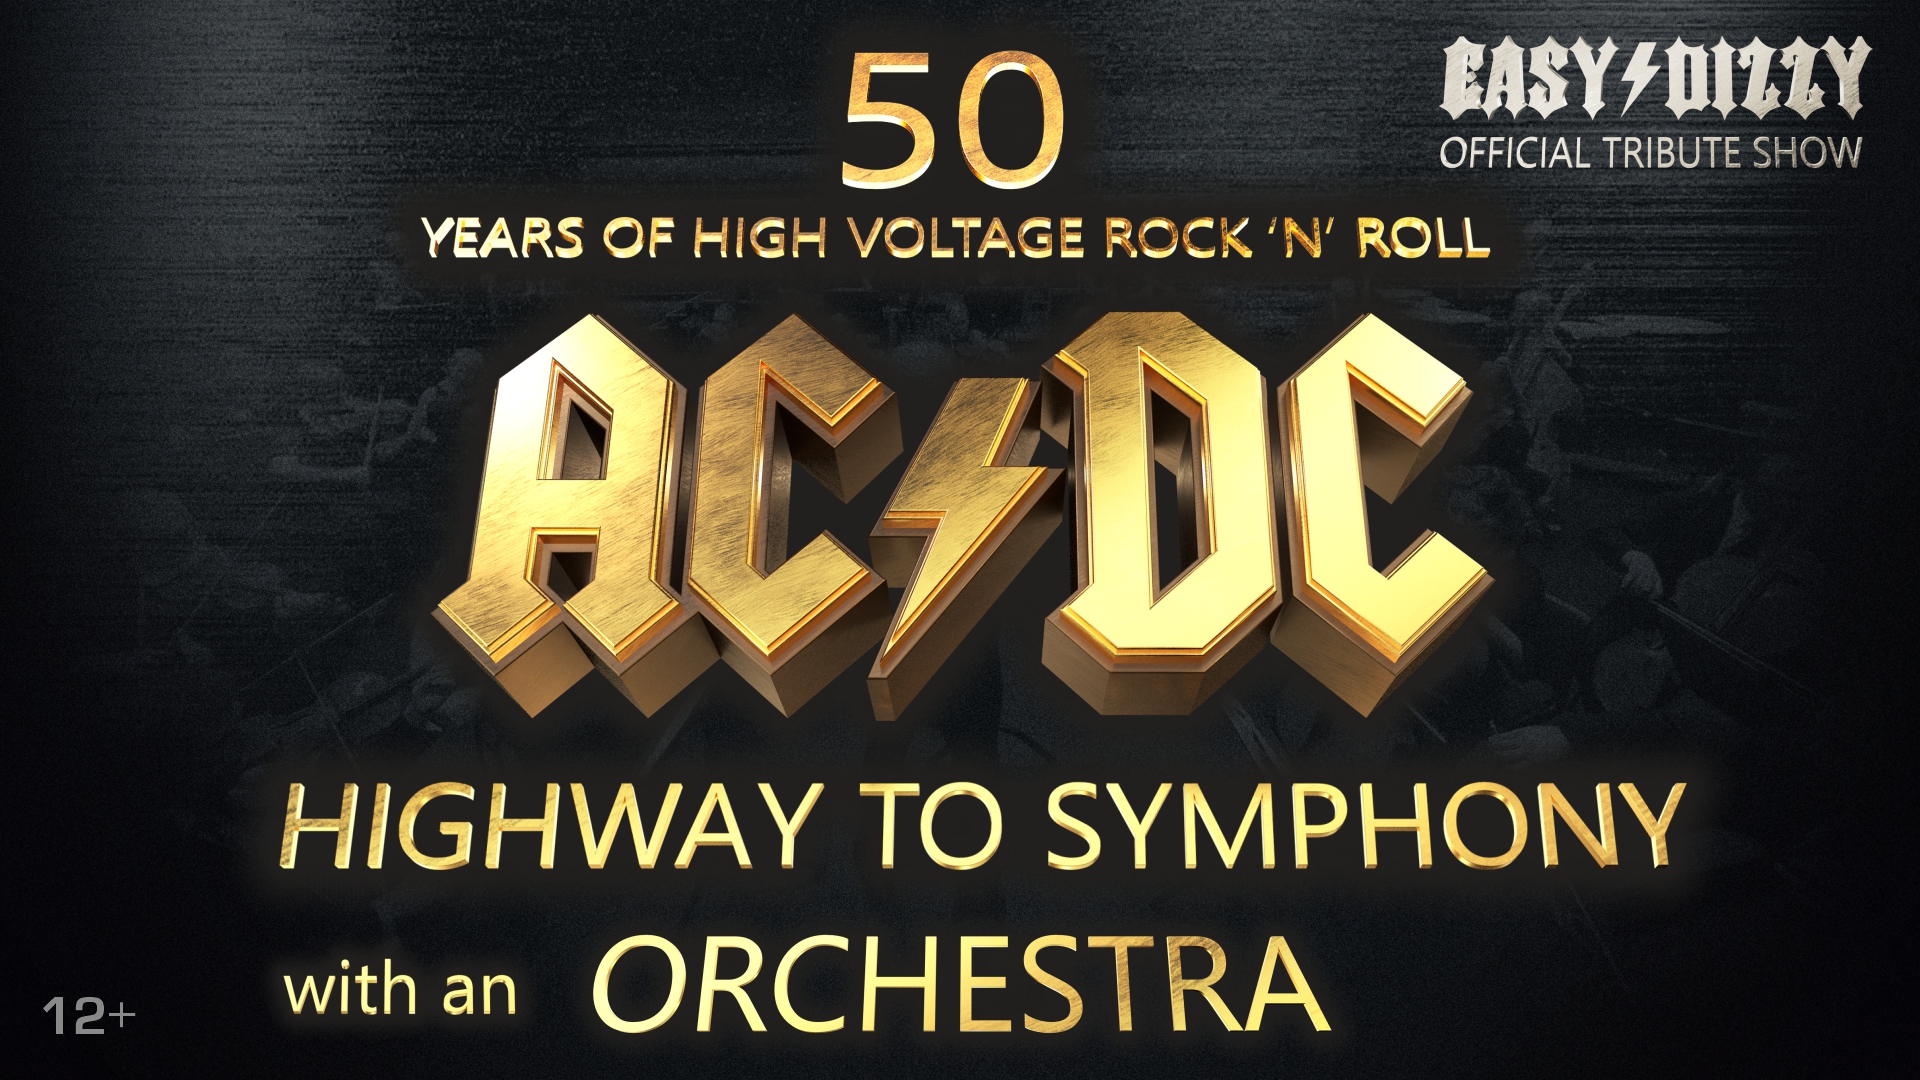 “HIGHWAY TO SYMPHONY” AC/DC 50th ANNIVERSARY ORCHESTRA SHOW